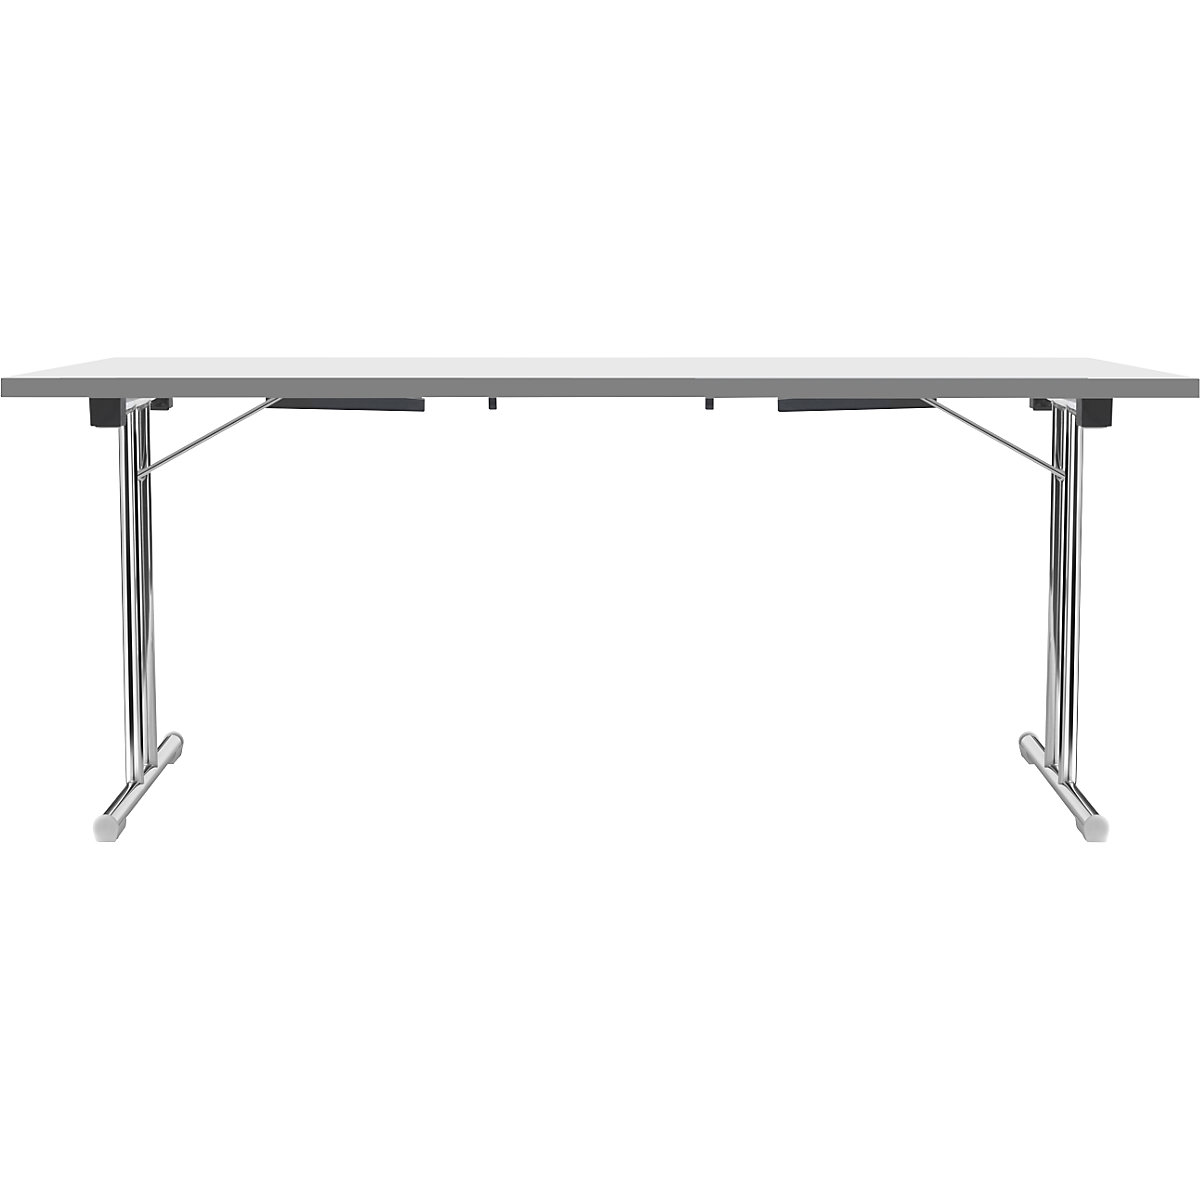 Folding table with double T base, tubular steel frame, chrome plated, white/charcoal, WxD 1800 x 800 mm-1